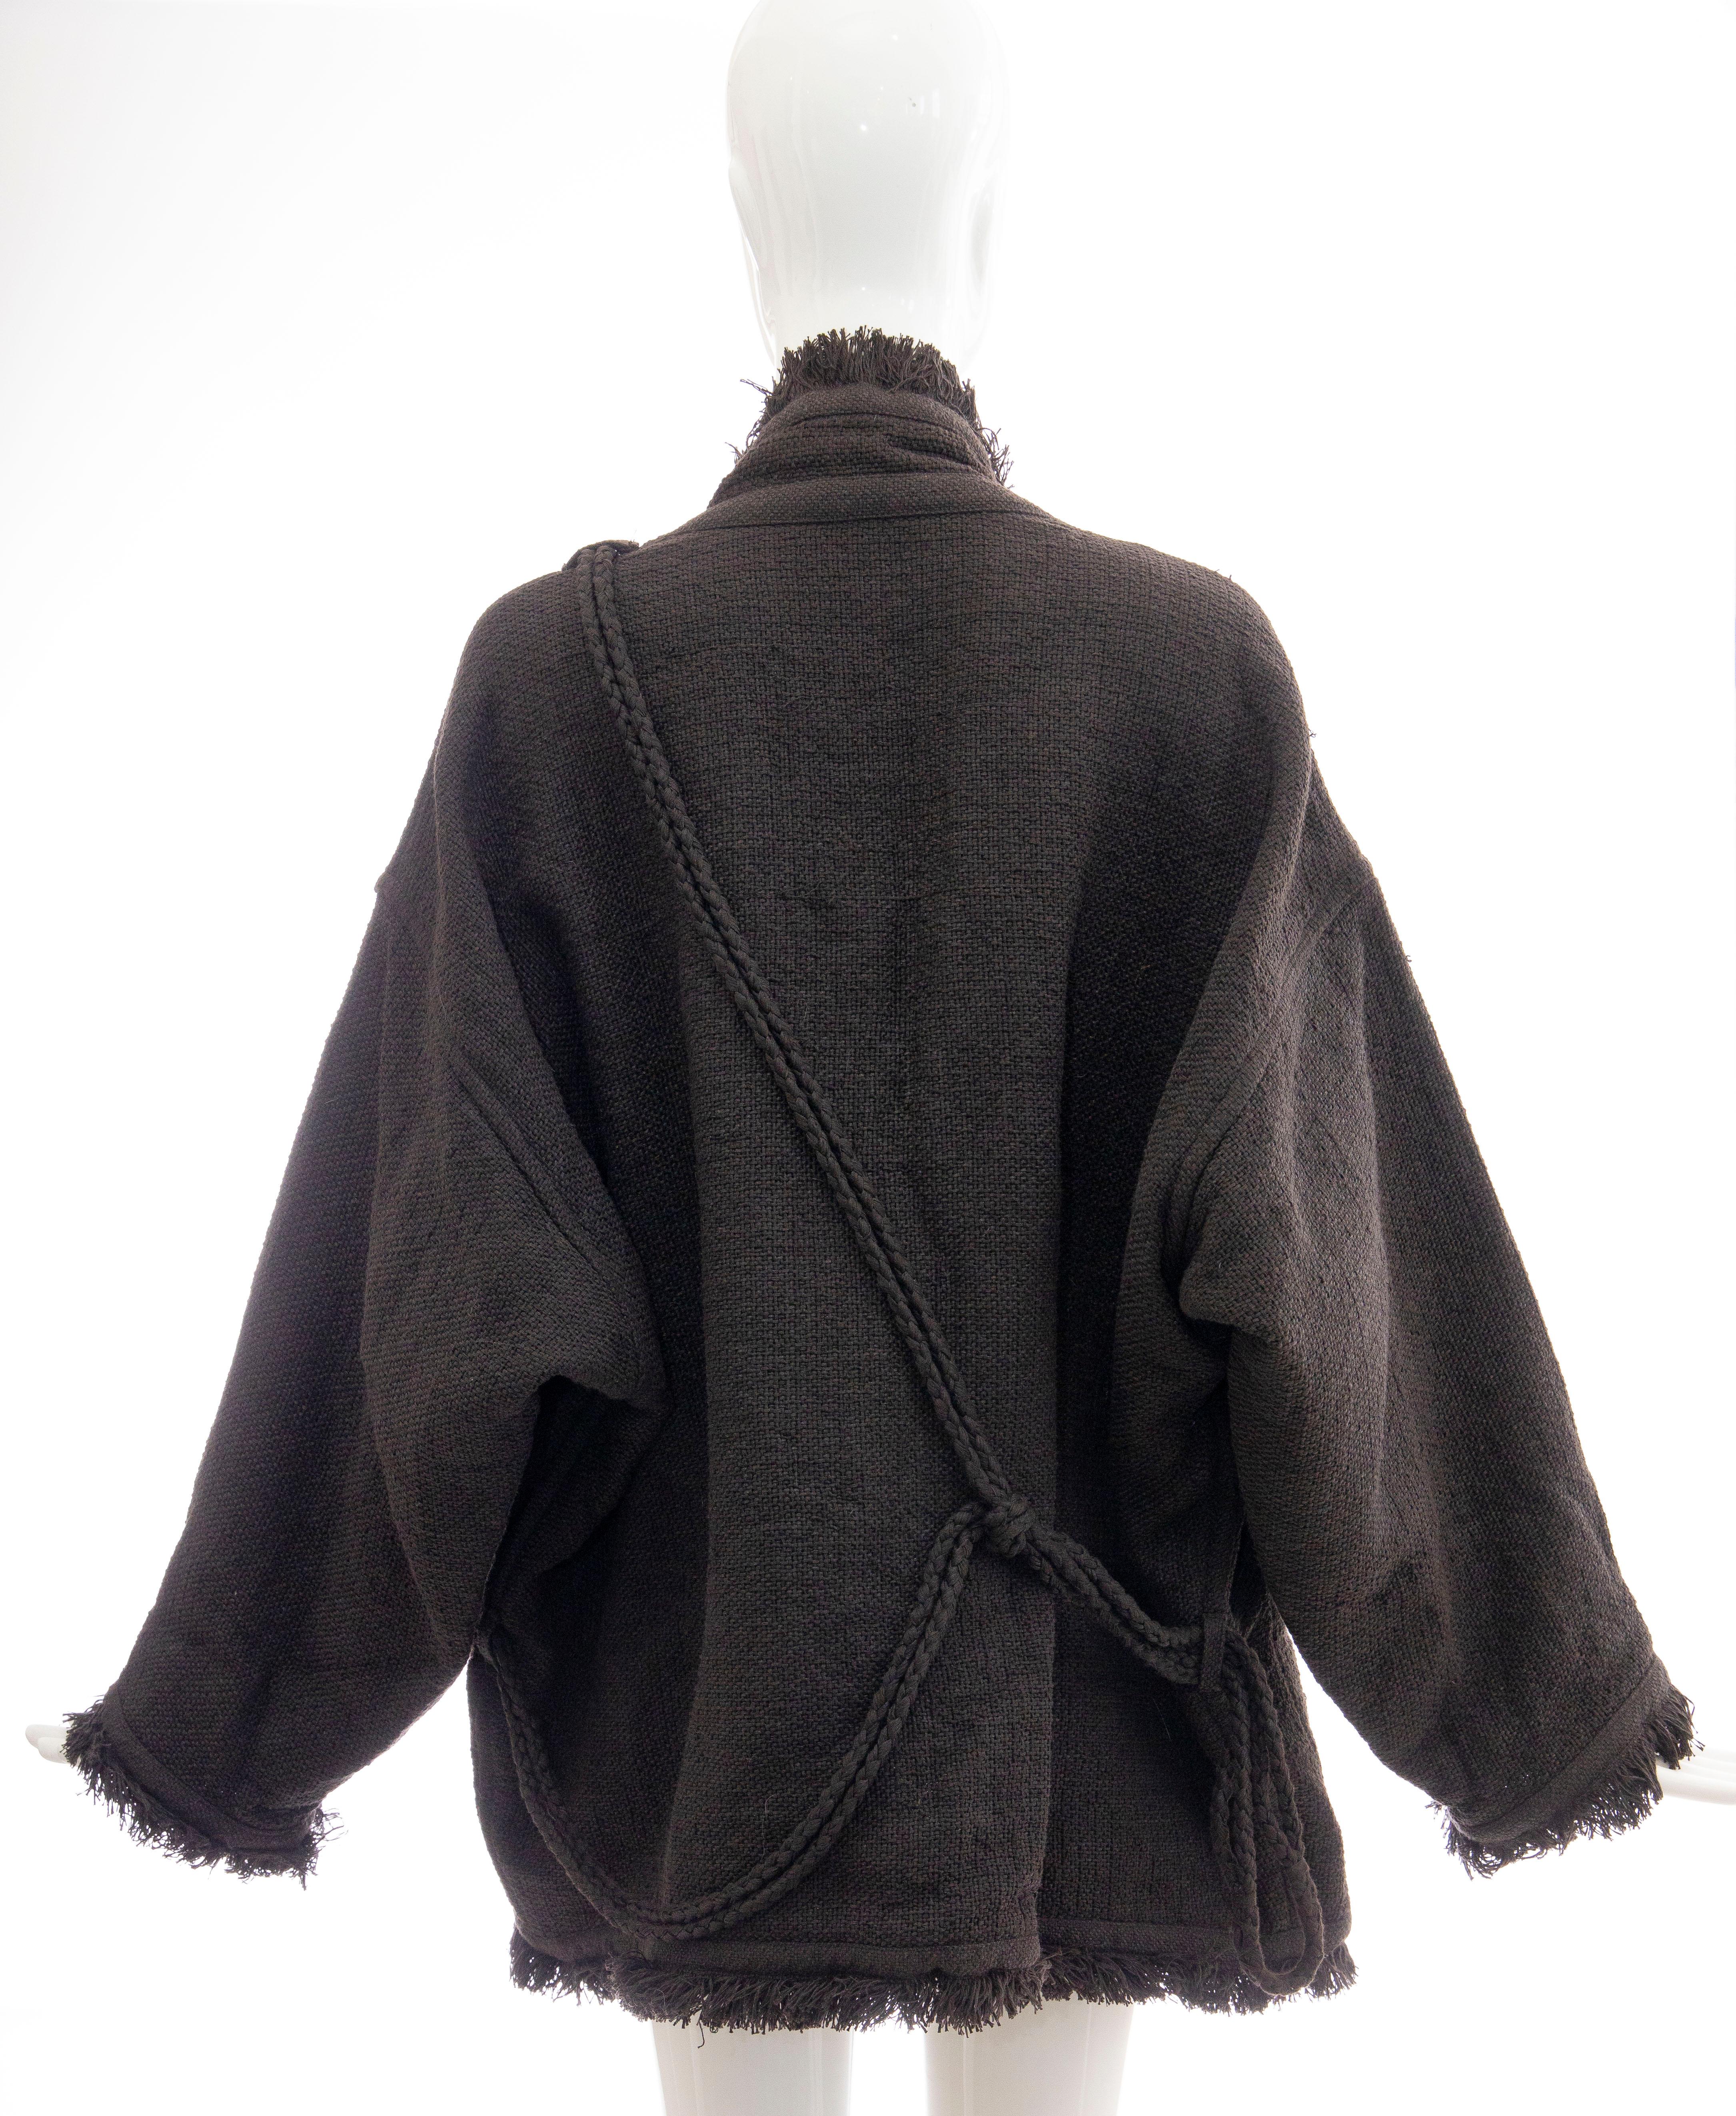 Issey Miyake Charcoal Grey Fringed Cotton Wool Woven Jacket, Fall 1984 In Excellent Condition For Sale In Cincinnati, OH